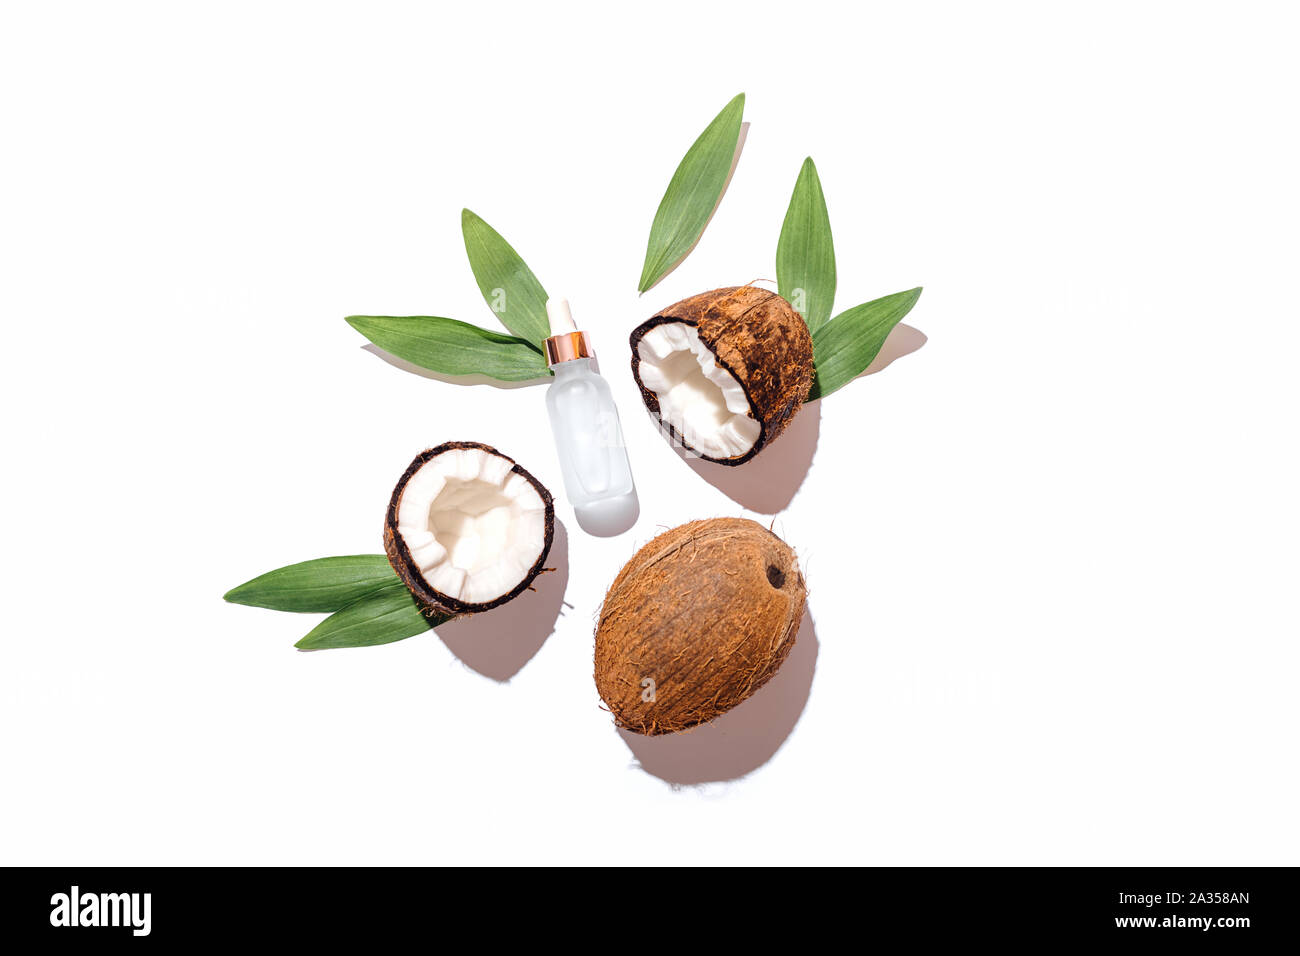 Fresh ripe coconuts with green leaves next to bottle of cosmetic serum on white background, flat lay composition. Stock Photo